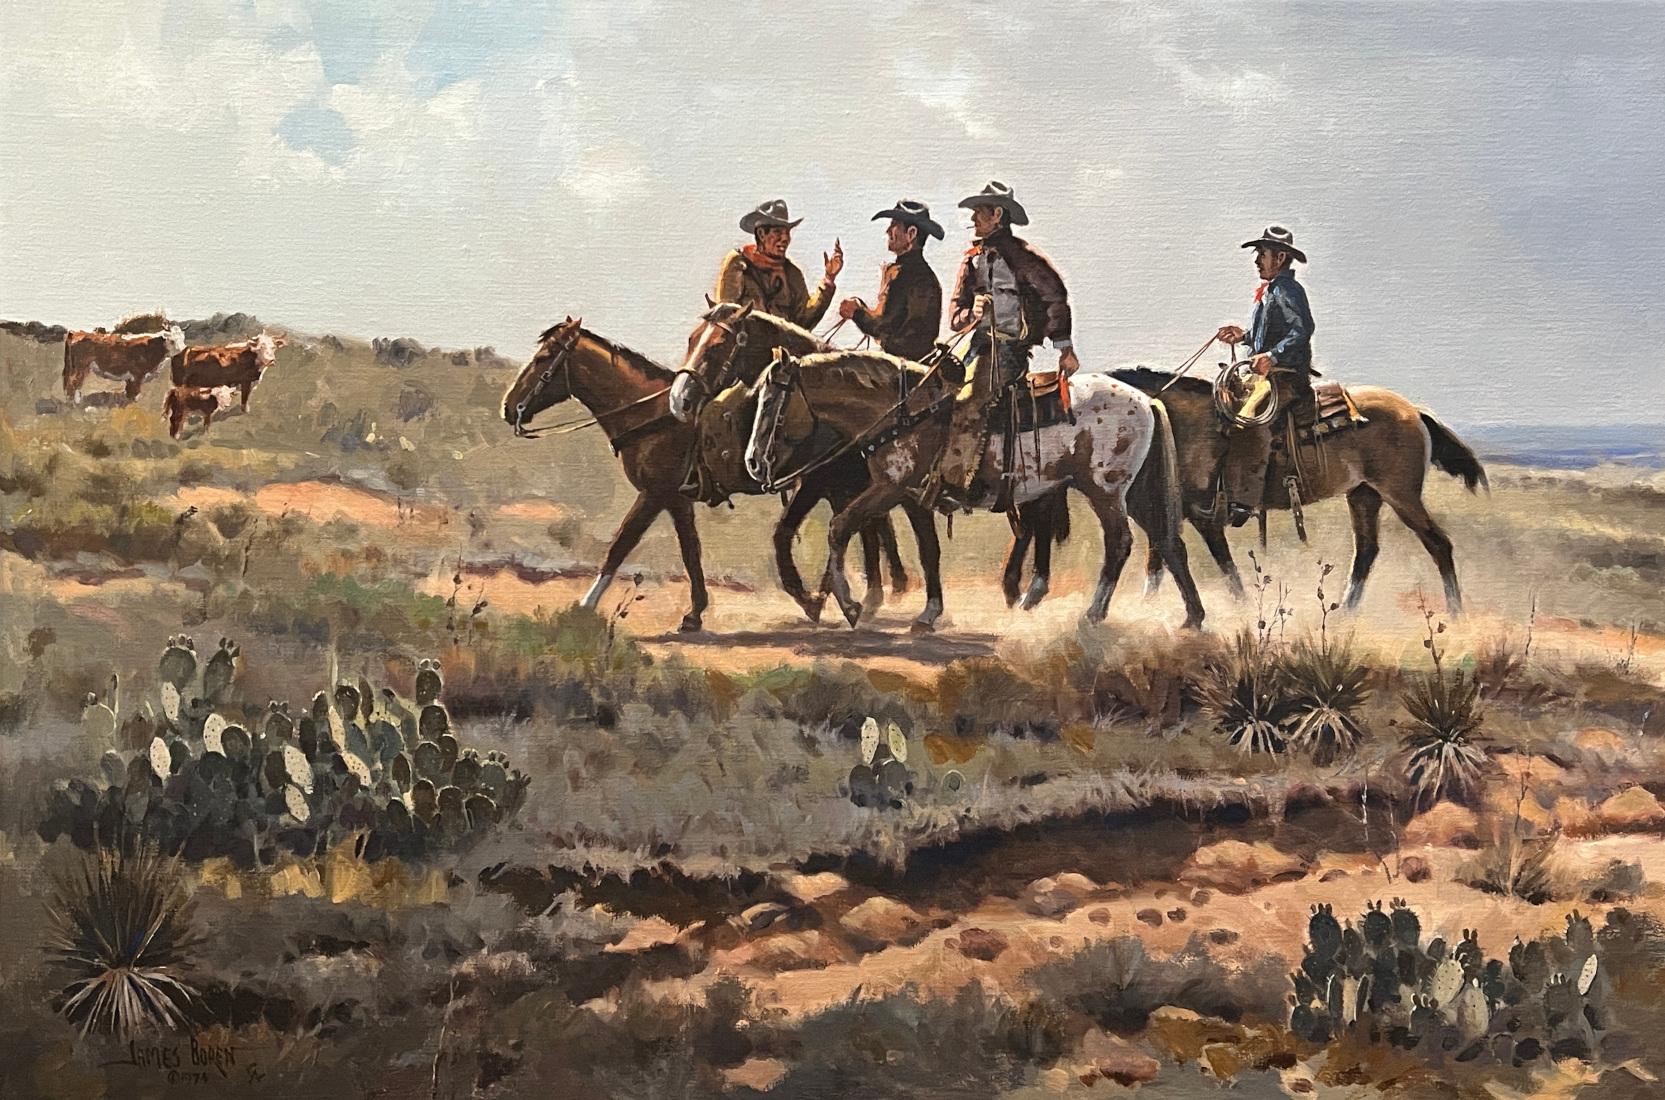 James Boren Animal Painting - "CAREFREE" WESTERN, COWBOYS, HORSES, CATTLE, PRICKLY PEAR CACTUS (1921-1990)